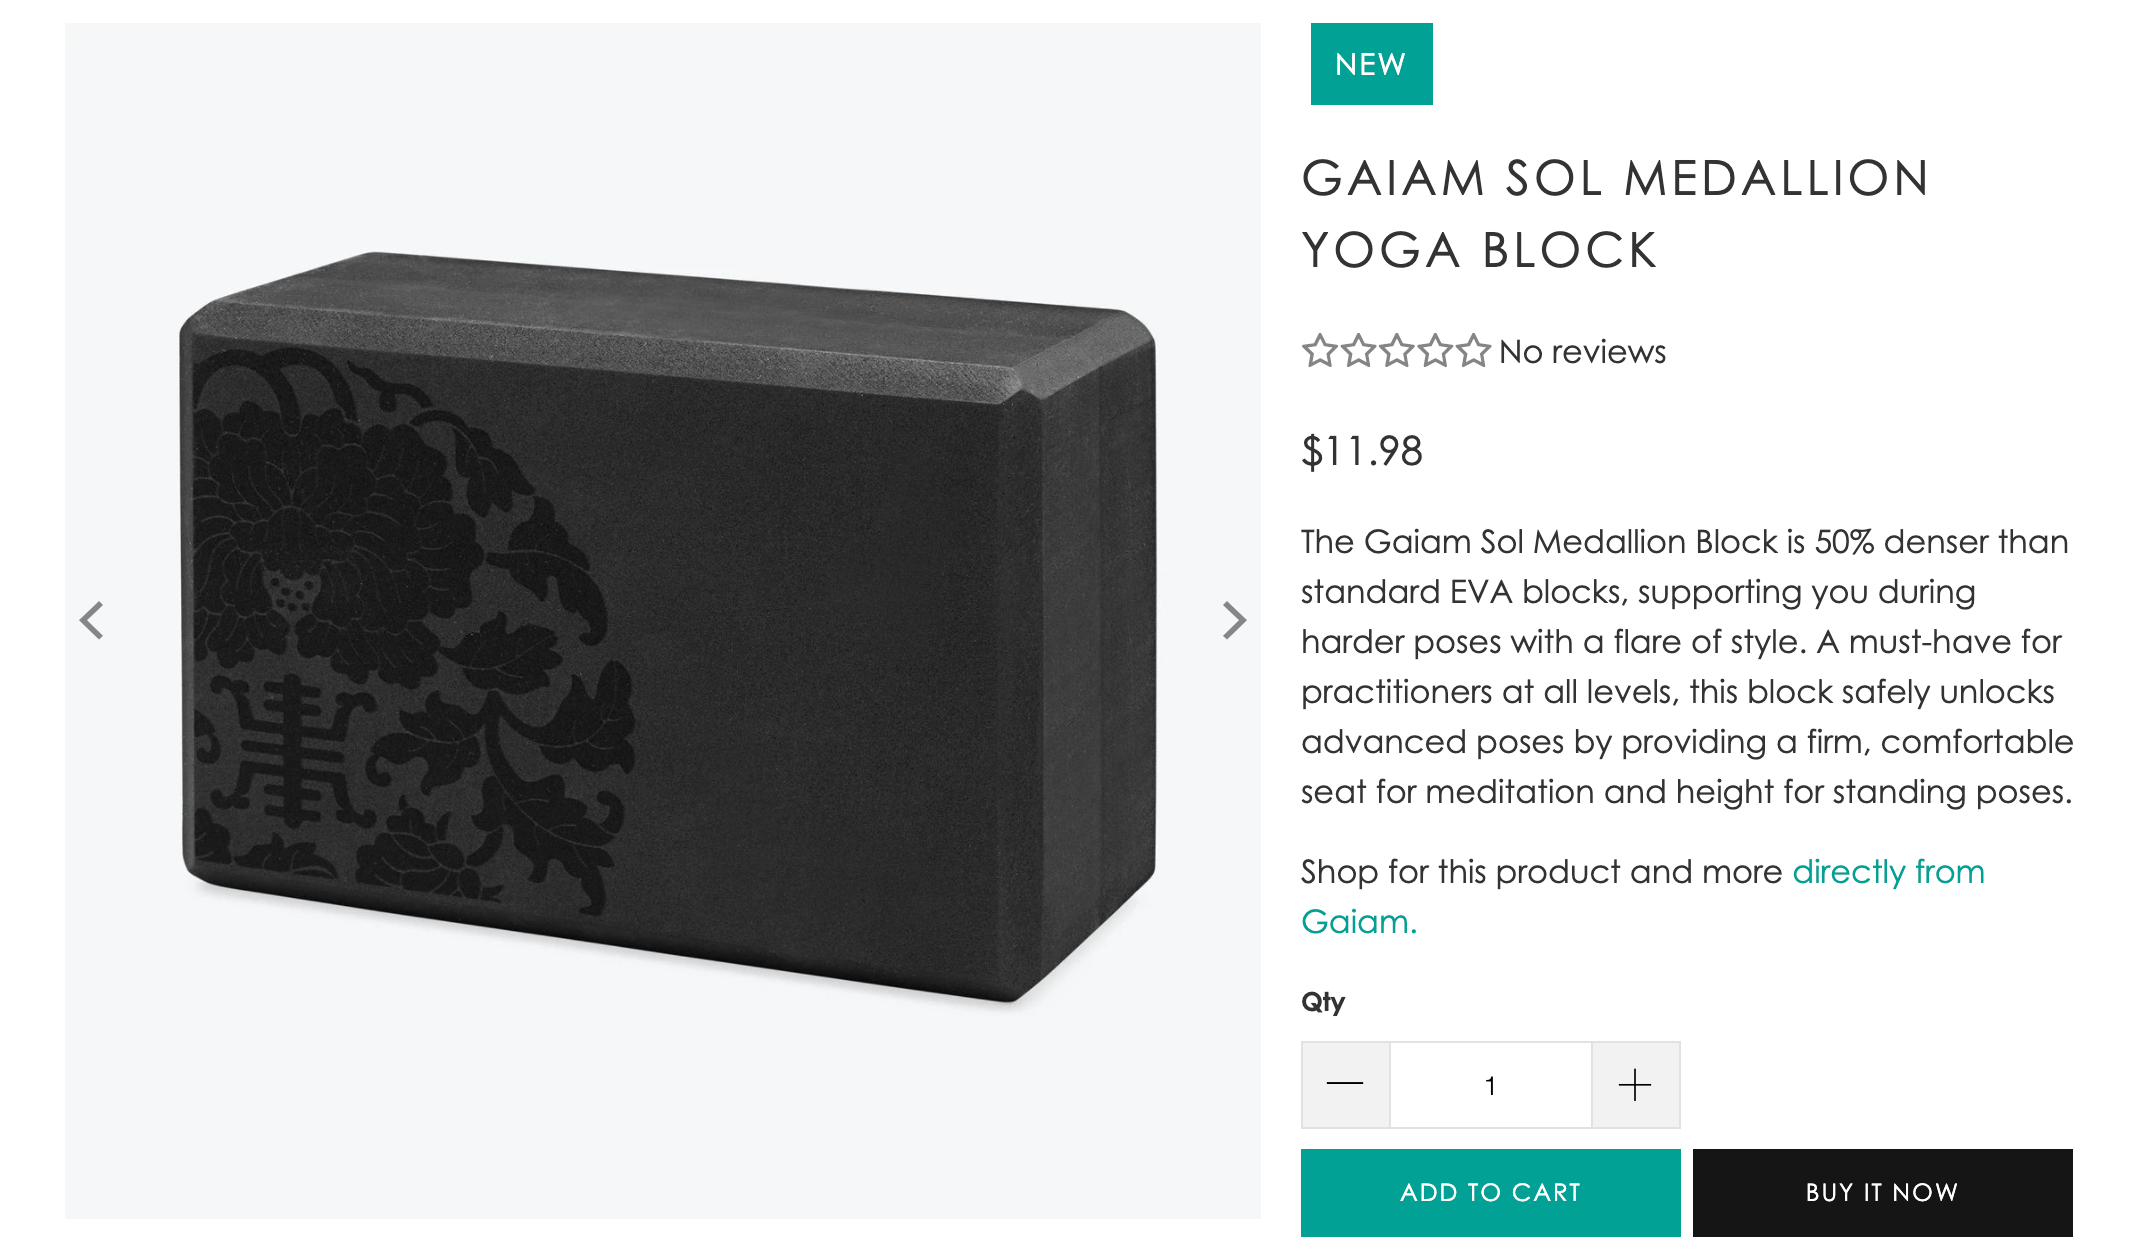 yoga_block_product_page_with_gallery_description_and_form.png